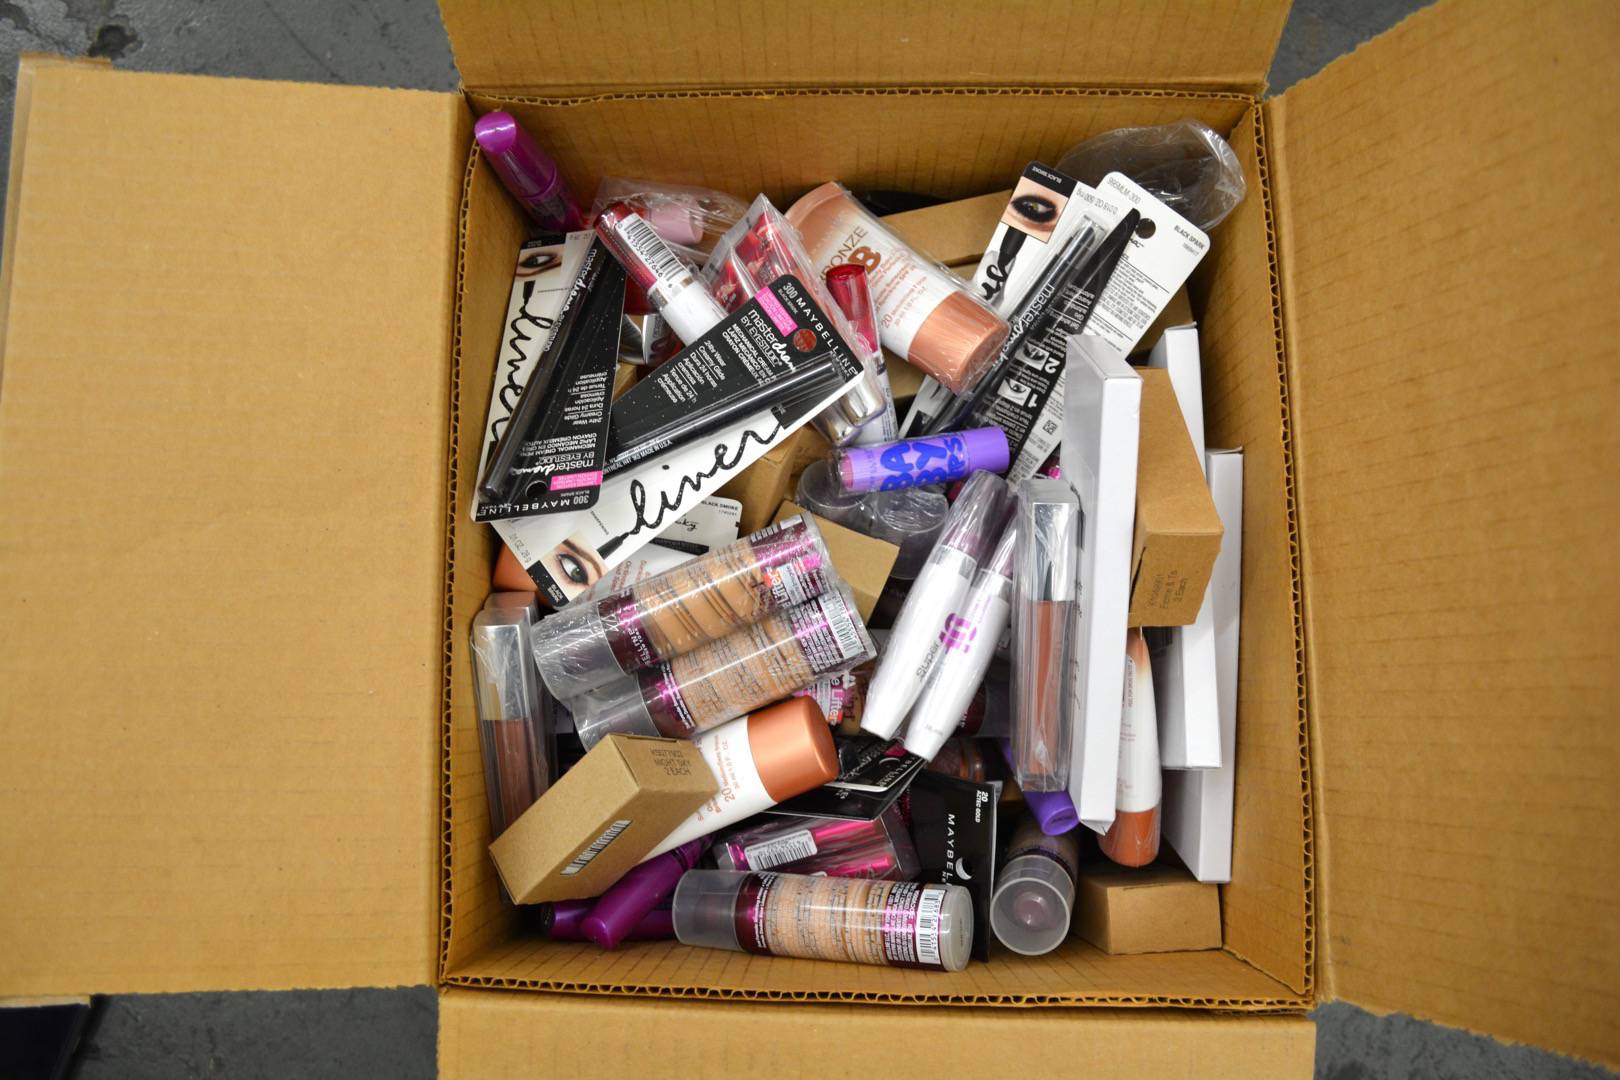 Maybelline New Overstock Cosmetic Lots - Assorted Case Packs of 250 units of New Overstock Maybelline Cosmetics. Partially Manifested.